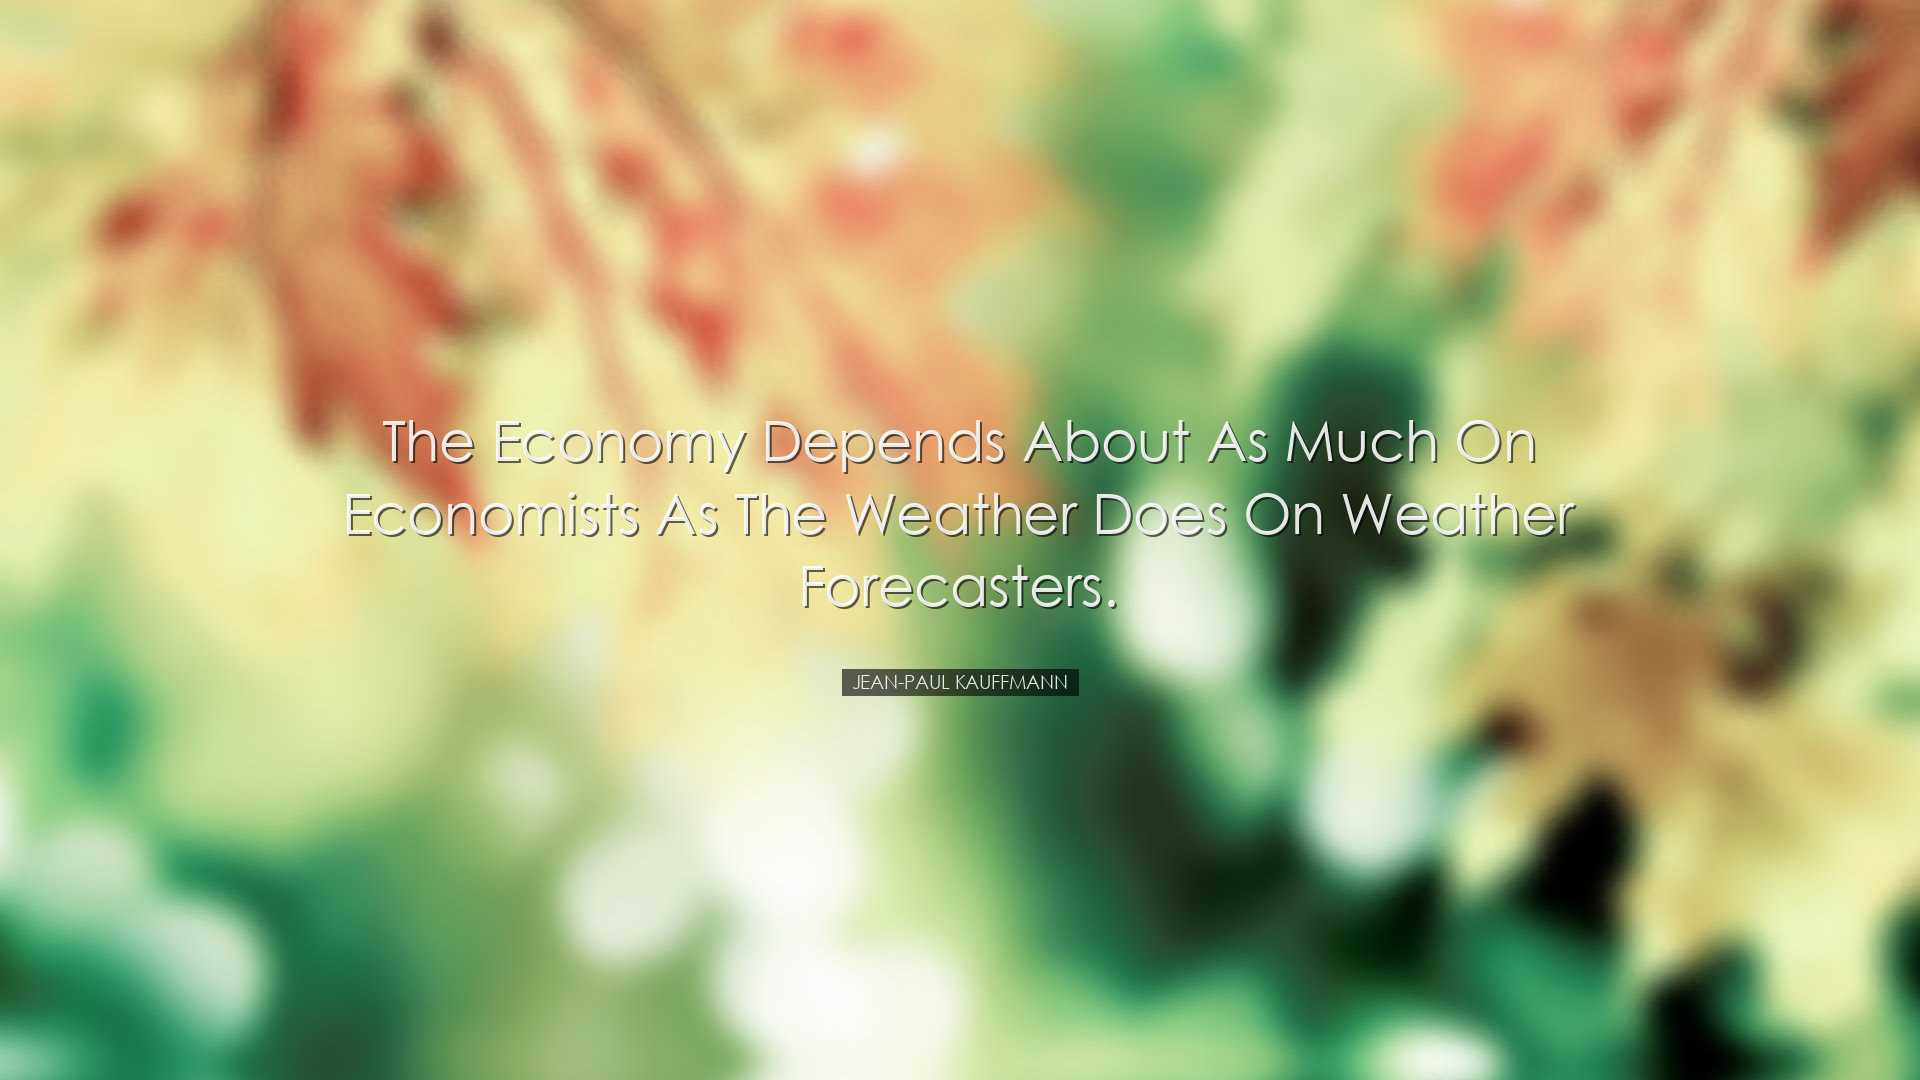 The economy depends about as much on economists as the weather doe